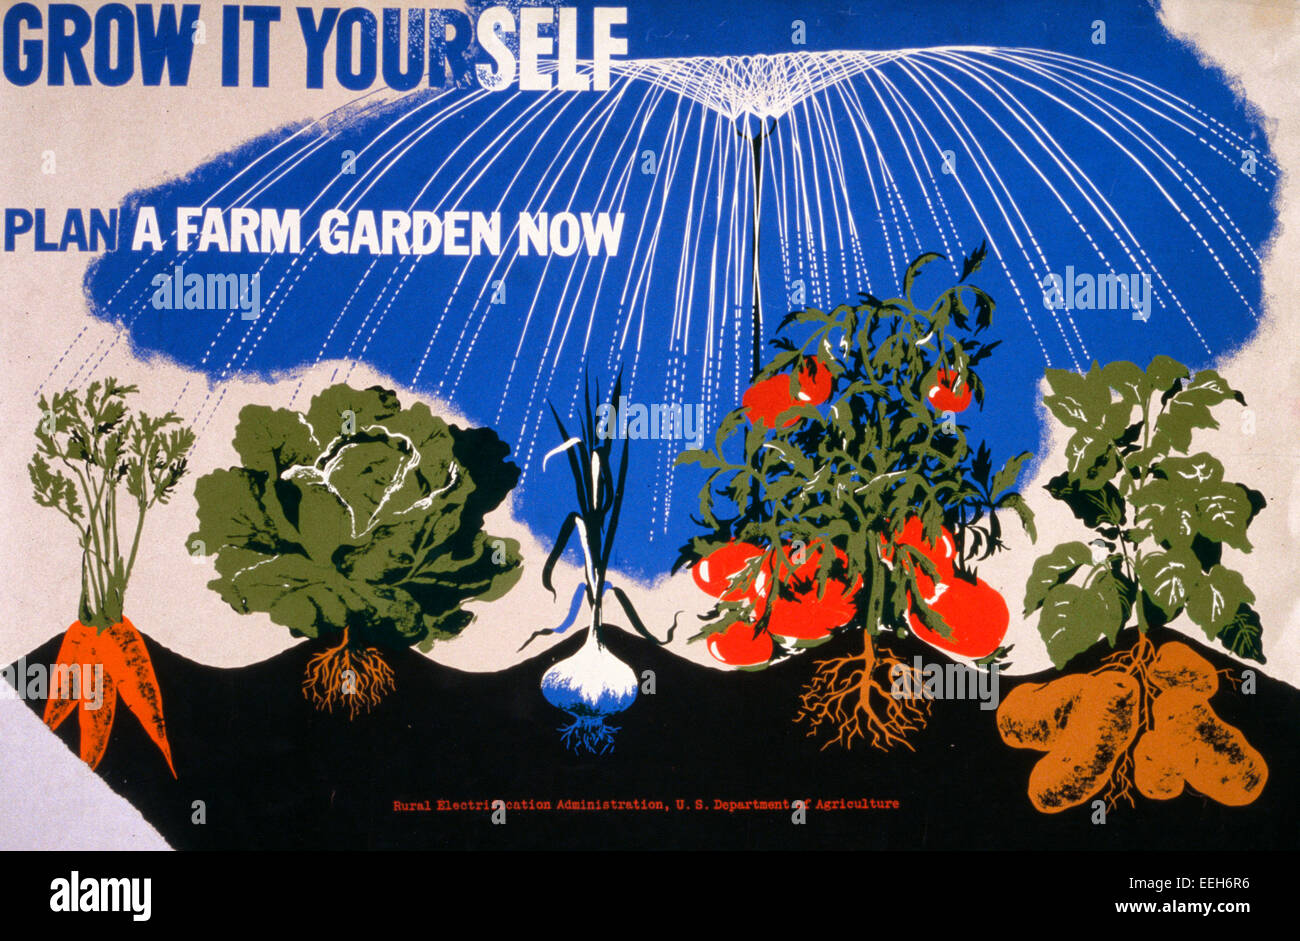 Grow it yourself Plan a farm garden now. Poster for the U.S. Department of Agriculture promoting victory gardens, showing carrots, lettuce, corn, tomatoes, and potatoes growing, circa 1943 Stock Photo